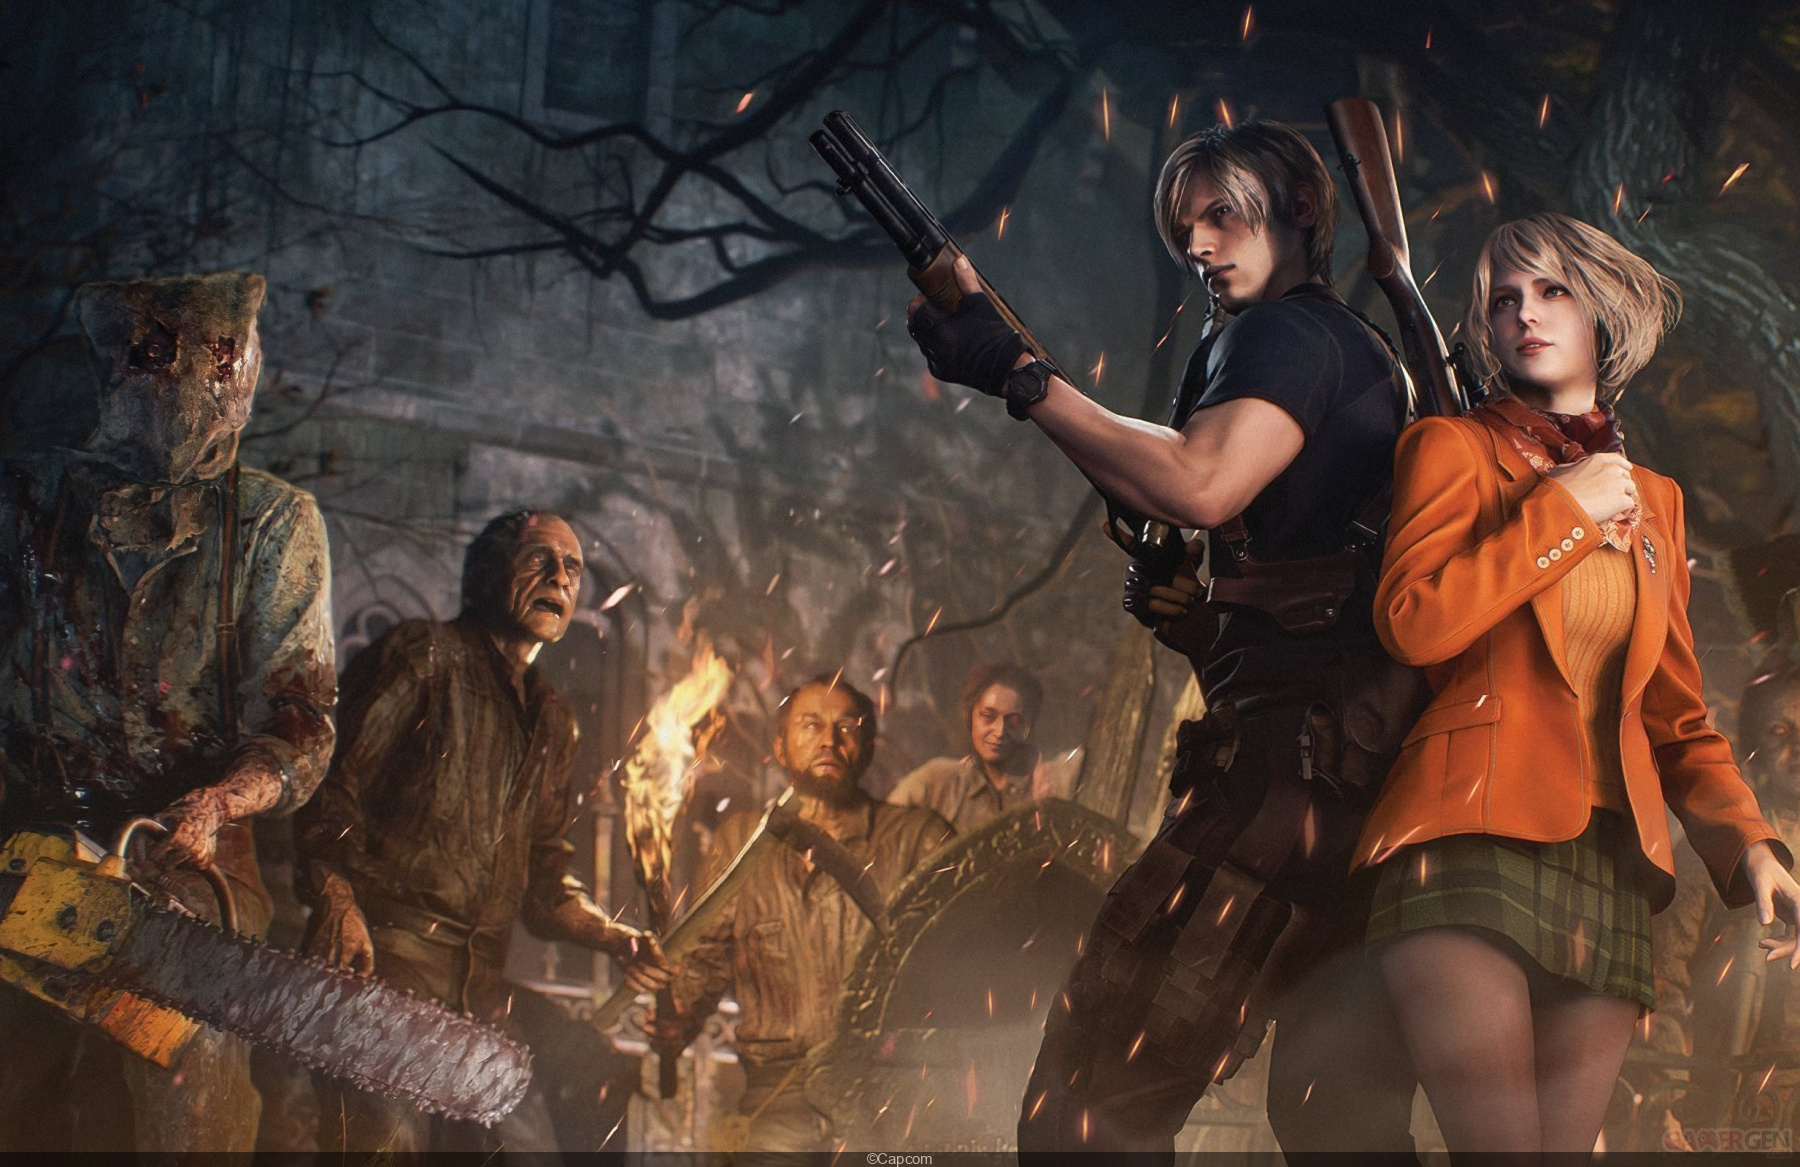 Resident Evil 4 Remake announced at PlayStation State of Play event, Games